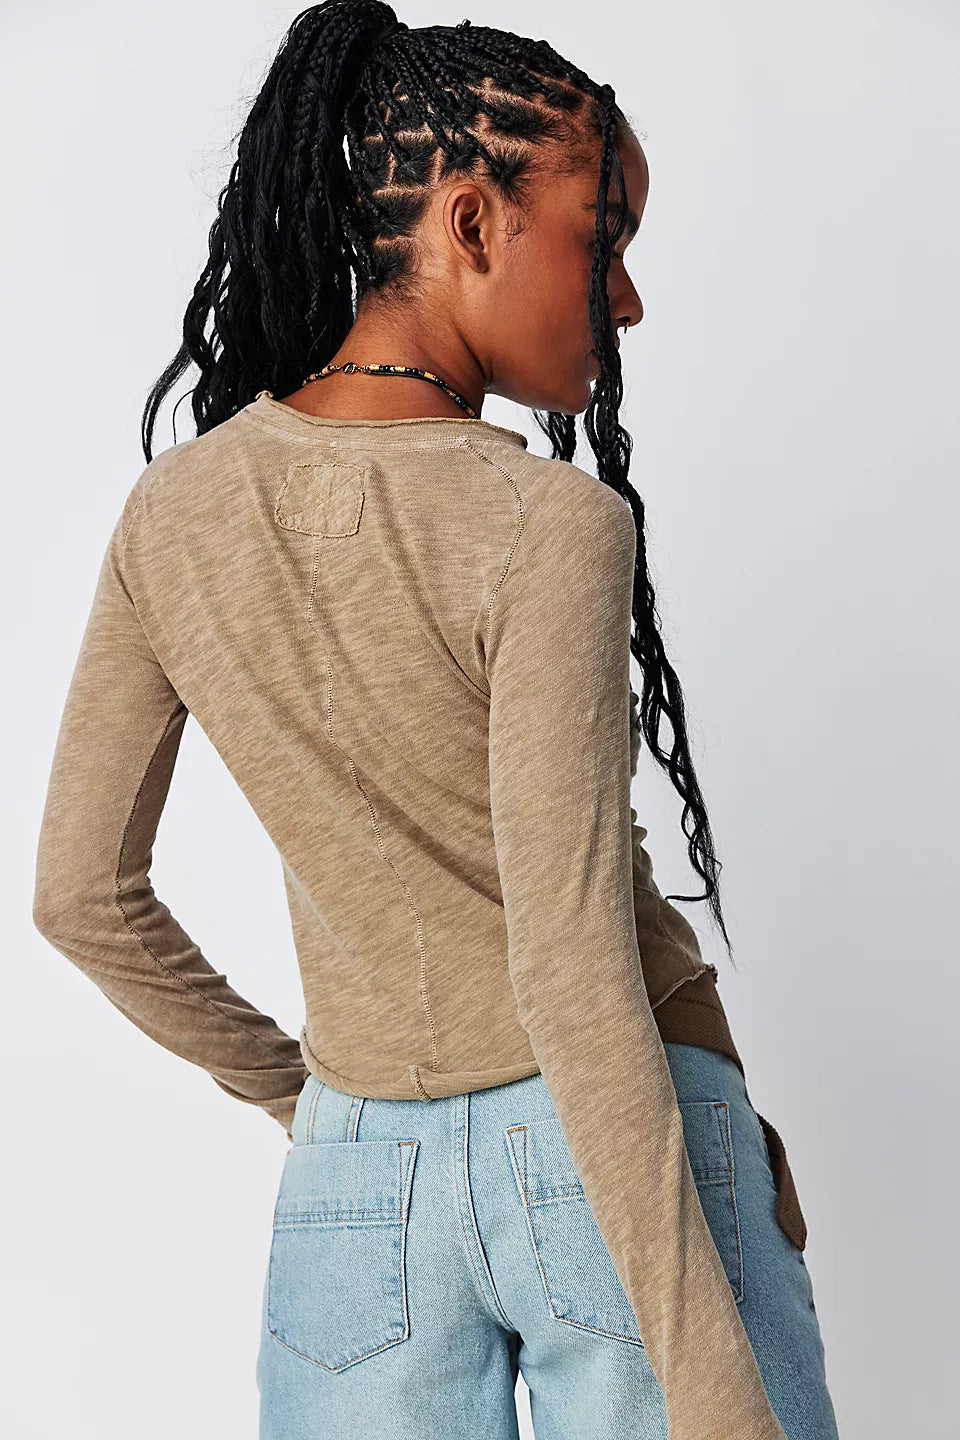 Free People Care FP Be My Baby Long Sleeve - TROPICAL NUT - Sun Diego Boardshop